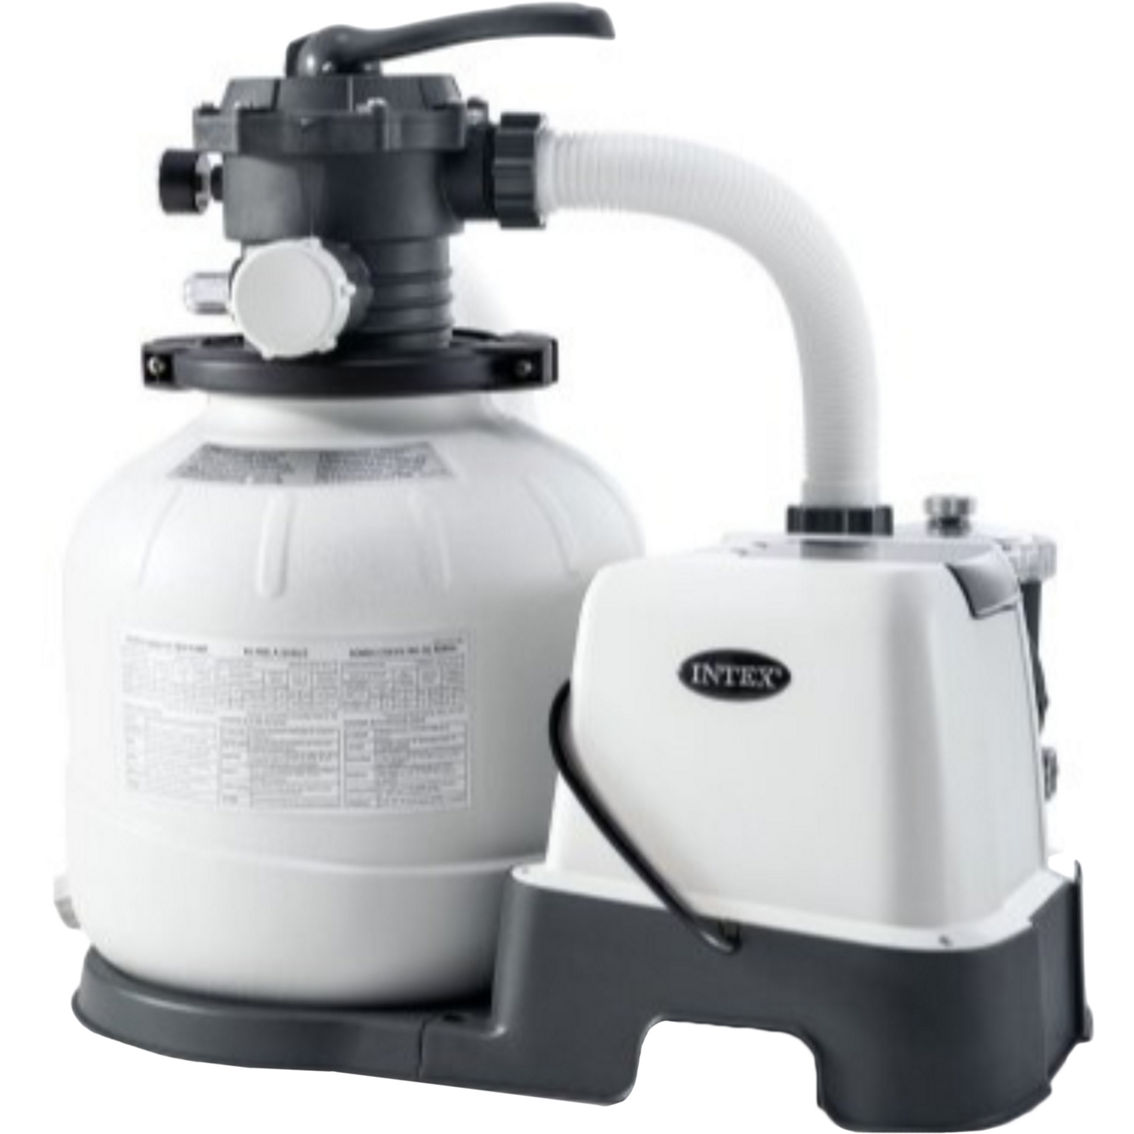 Intex 120V Sand Filter Pump and Saltwater System - Image 2 of 3